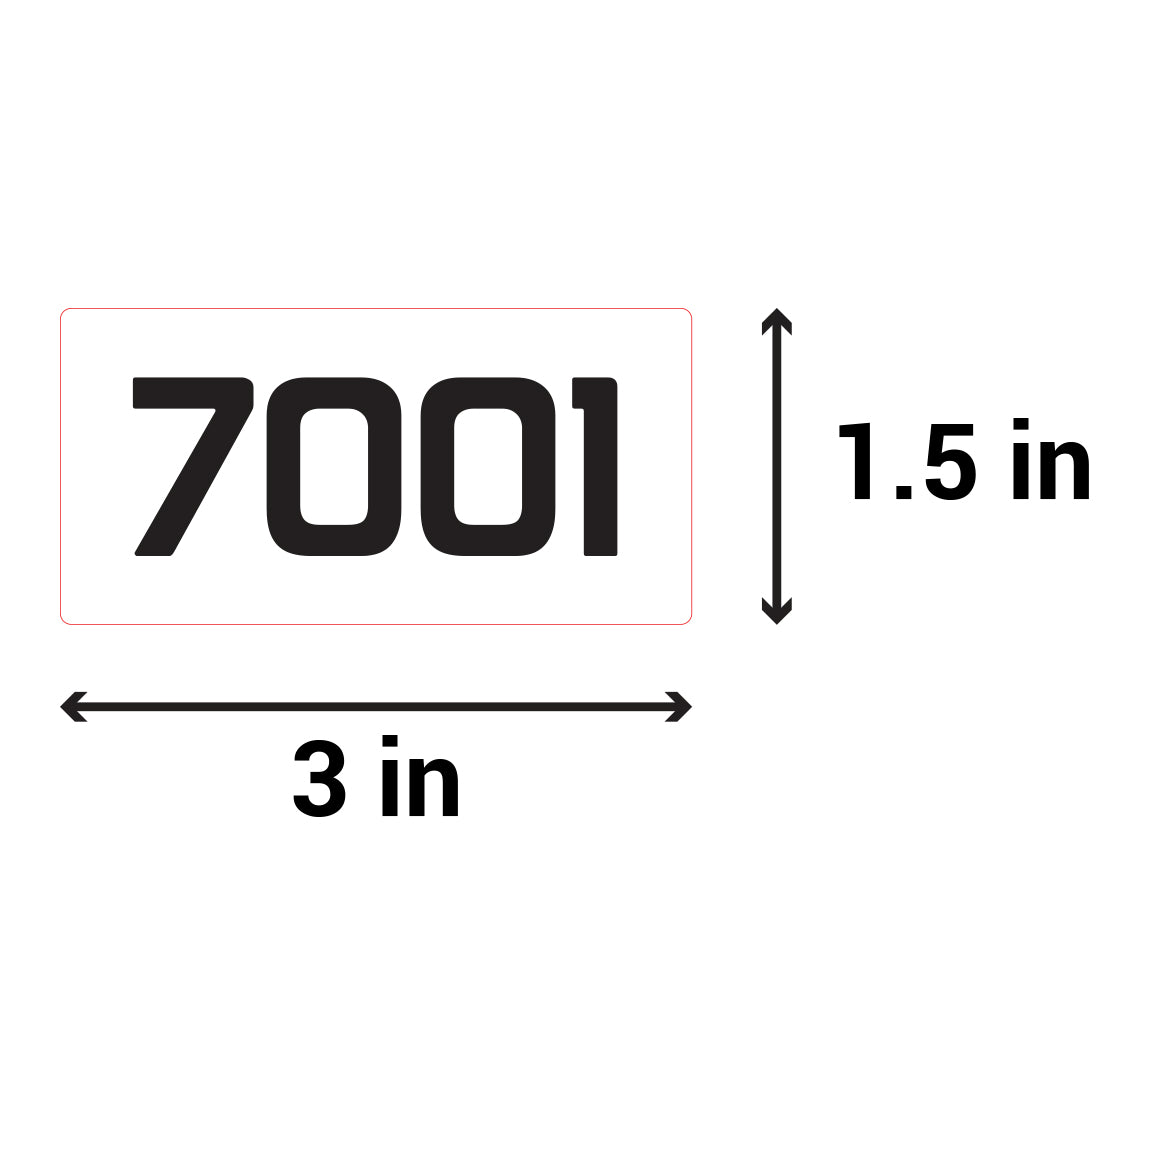 3 x 1.5 inch | Inventory: Consecutive Numbers "7001 to 8000" Stickers